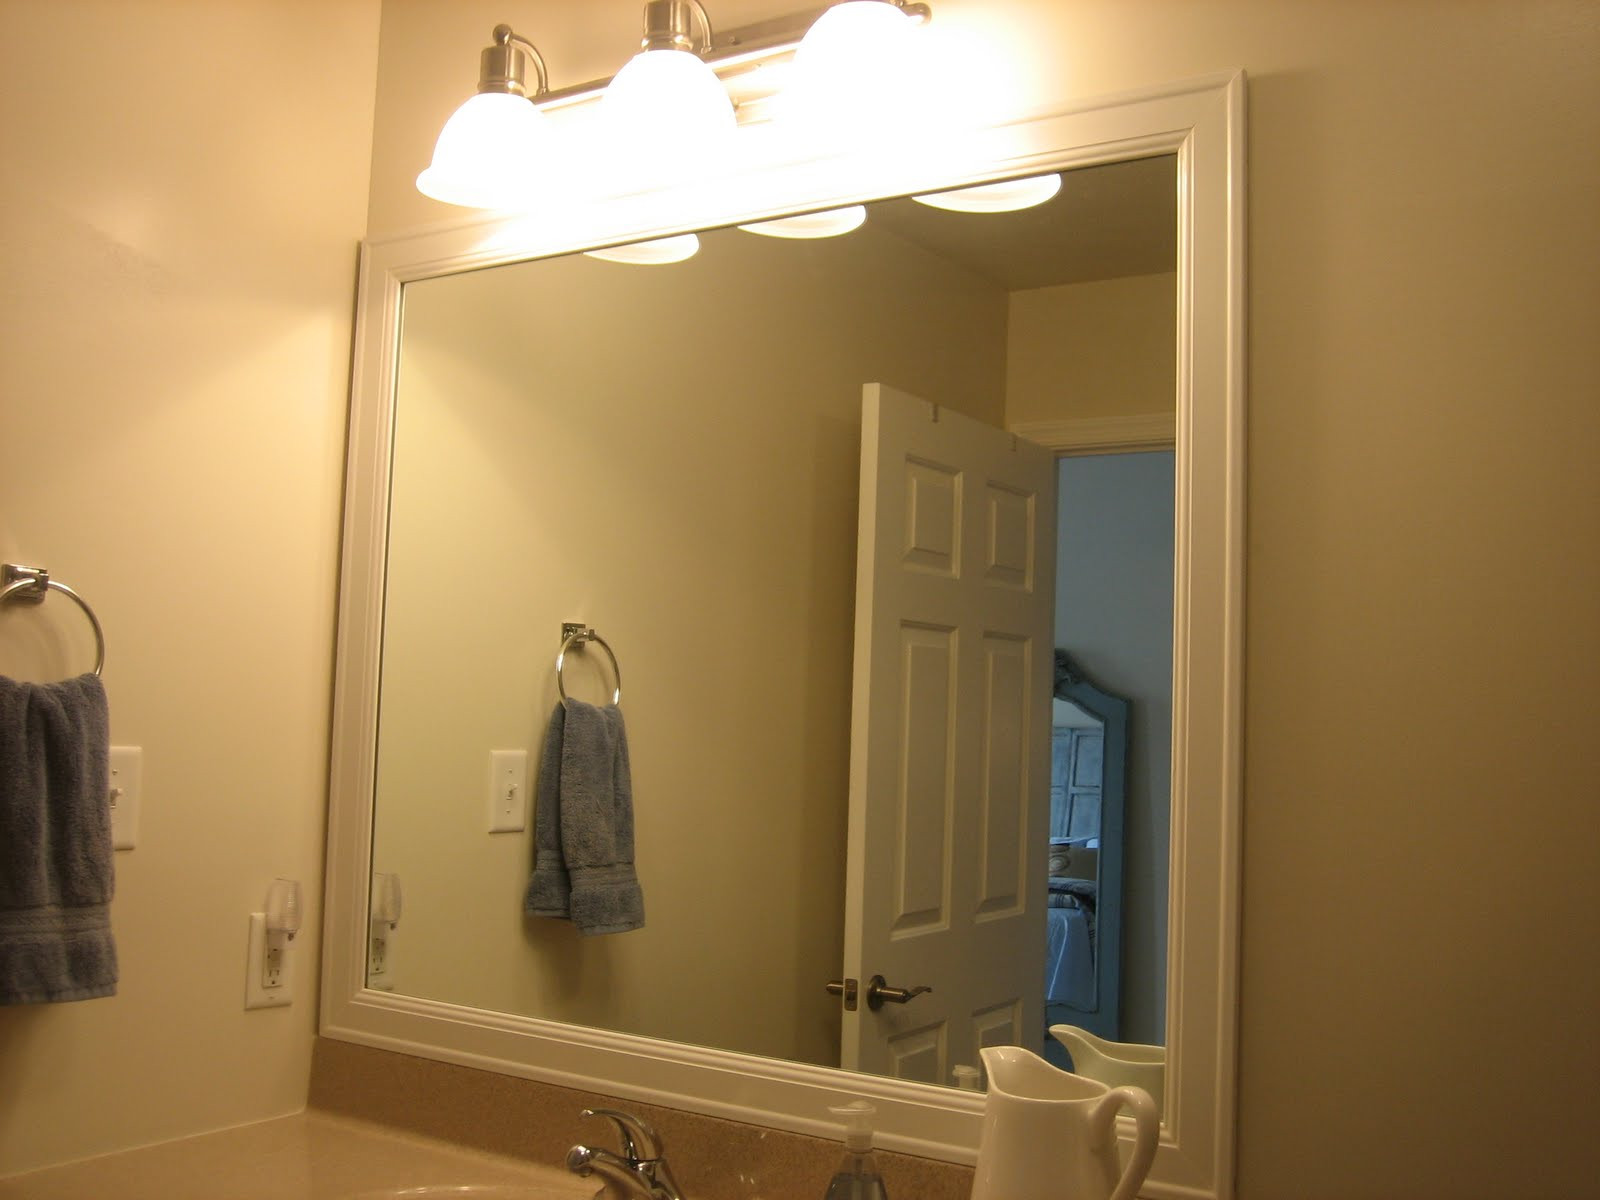 Discount Bathroom Mirror
 9 Easy Ways to Beautify Your Bathroom on the Cheap